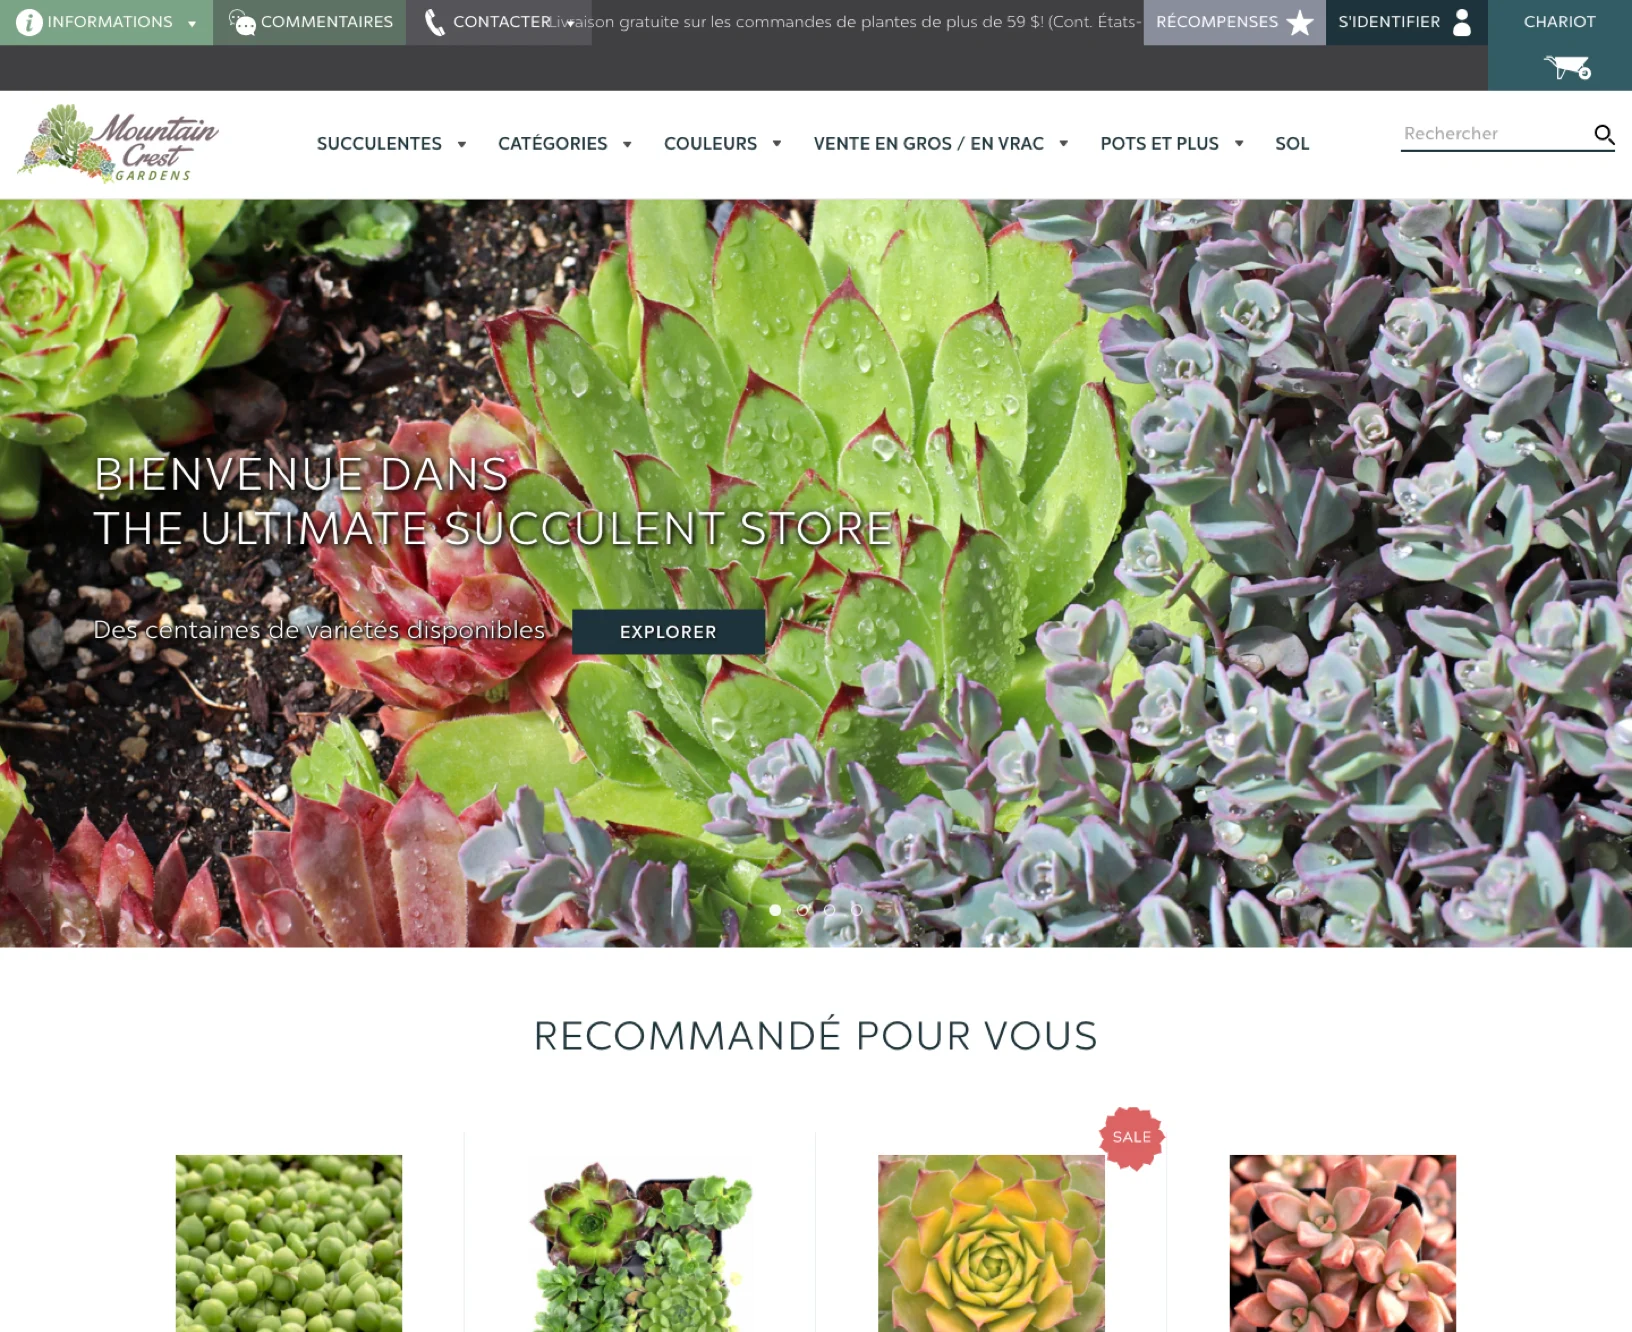 https://www-cdn.bigcommerce.com/assets/international-french-storefront-homepage-mountain-crest-gardens.png